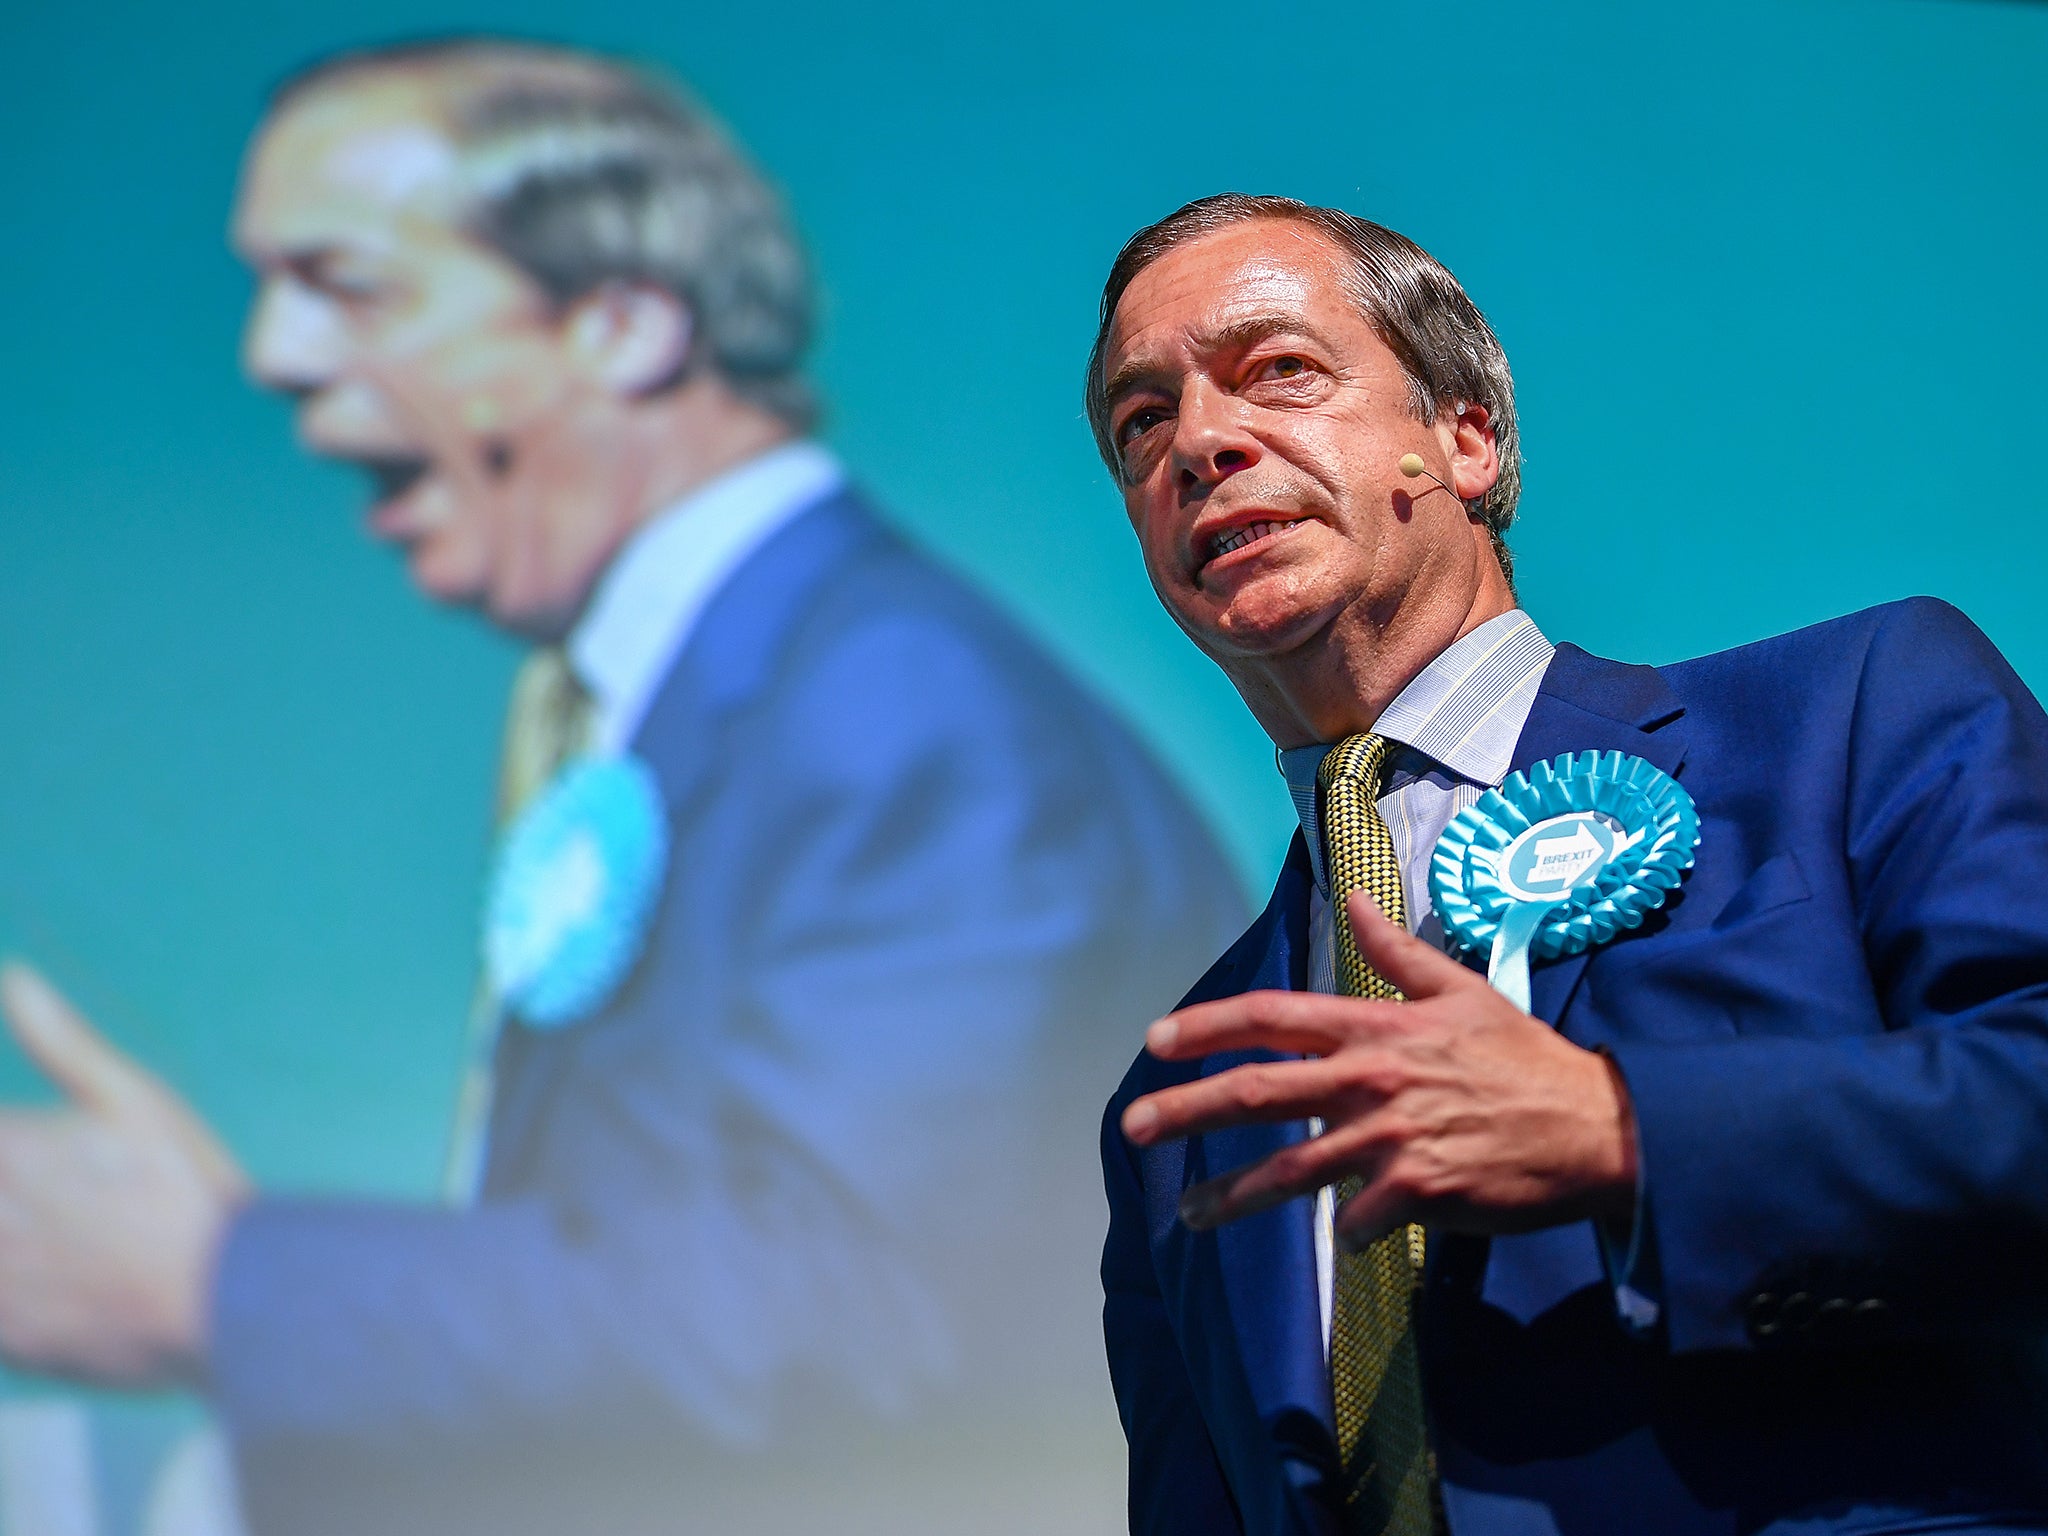 With Farage everyone knows what they’re getting – and that is the essence of a winning brand